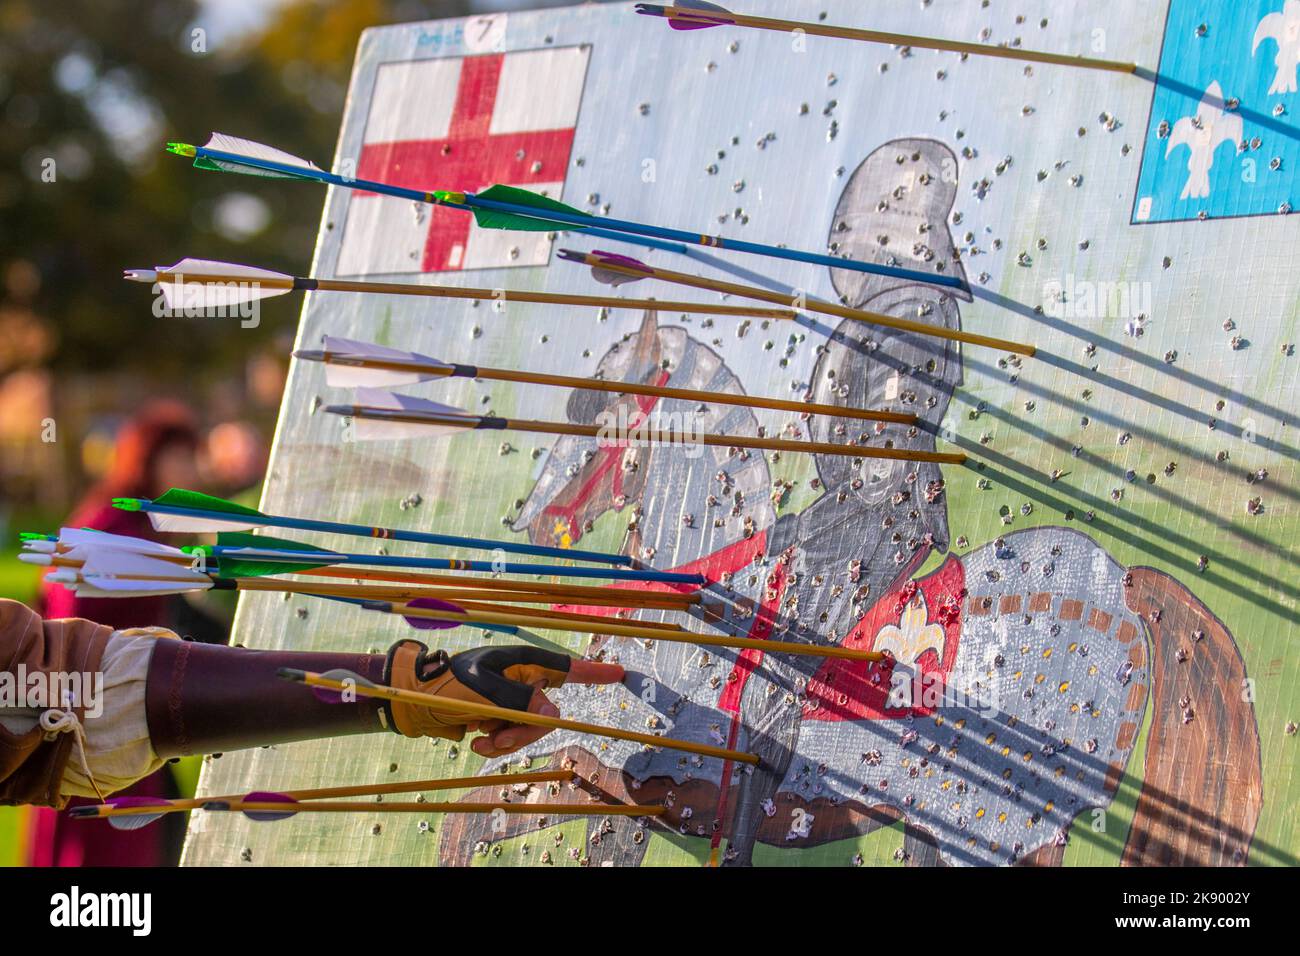 UK News Weather; Tuesday 25th October 2022. SAMLESBURY LONGBOW ARCHERS THE BATTLE OF AGINCOURT - 1415 reenactment. Traditional long bow archery shoot on of the battle anniversary in medieval dress, British Long-Bow Society (BLBS) event. Credit; MediaWorldImages/AlamyLiveNews Stock Photo